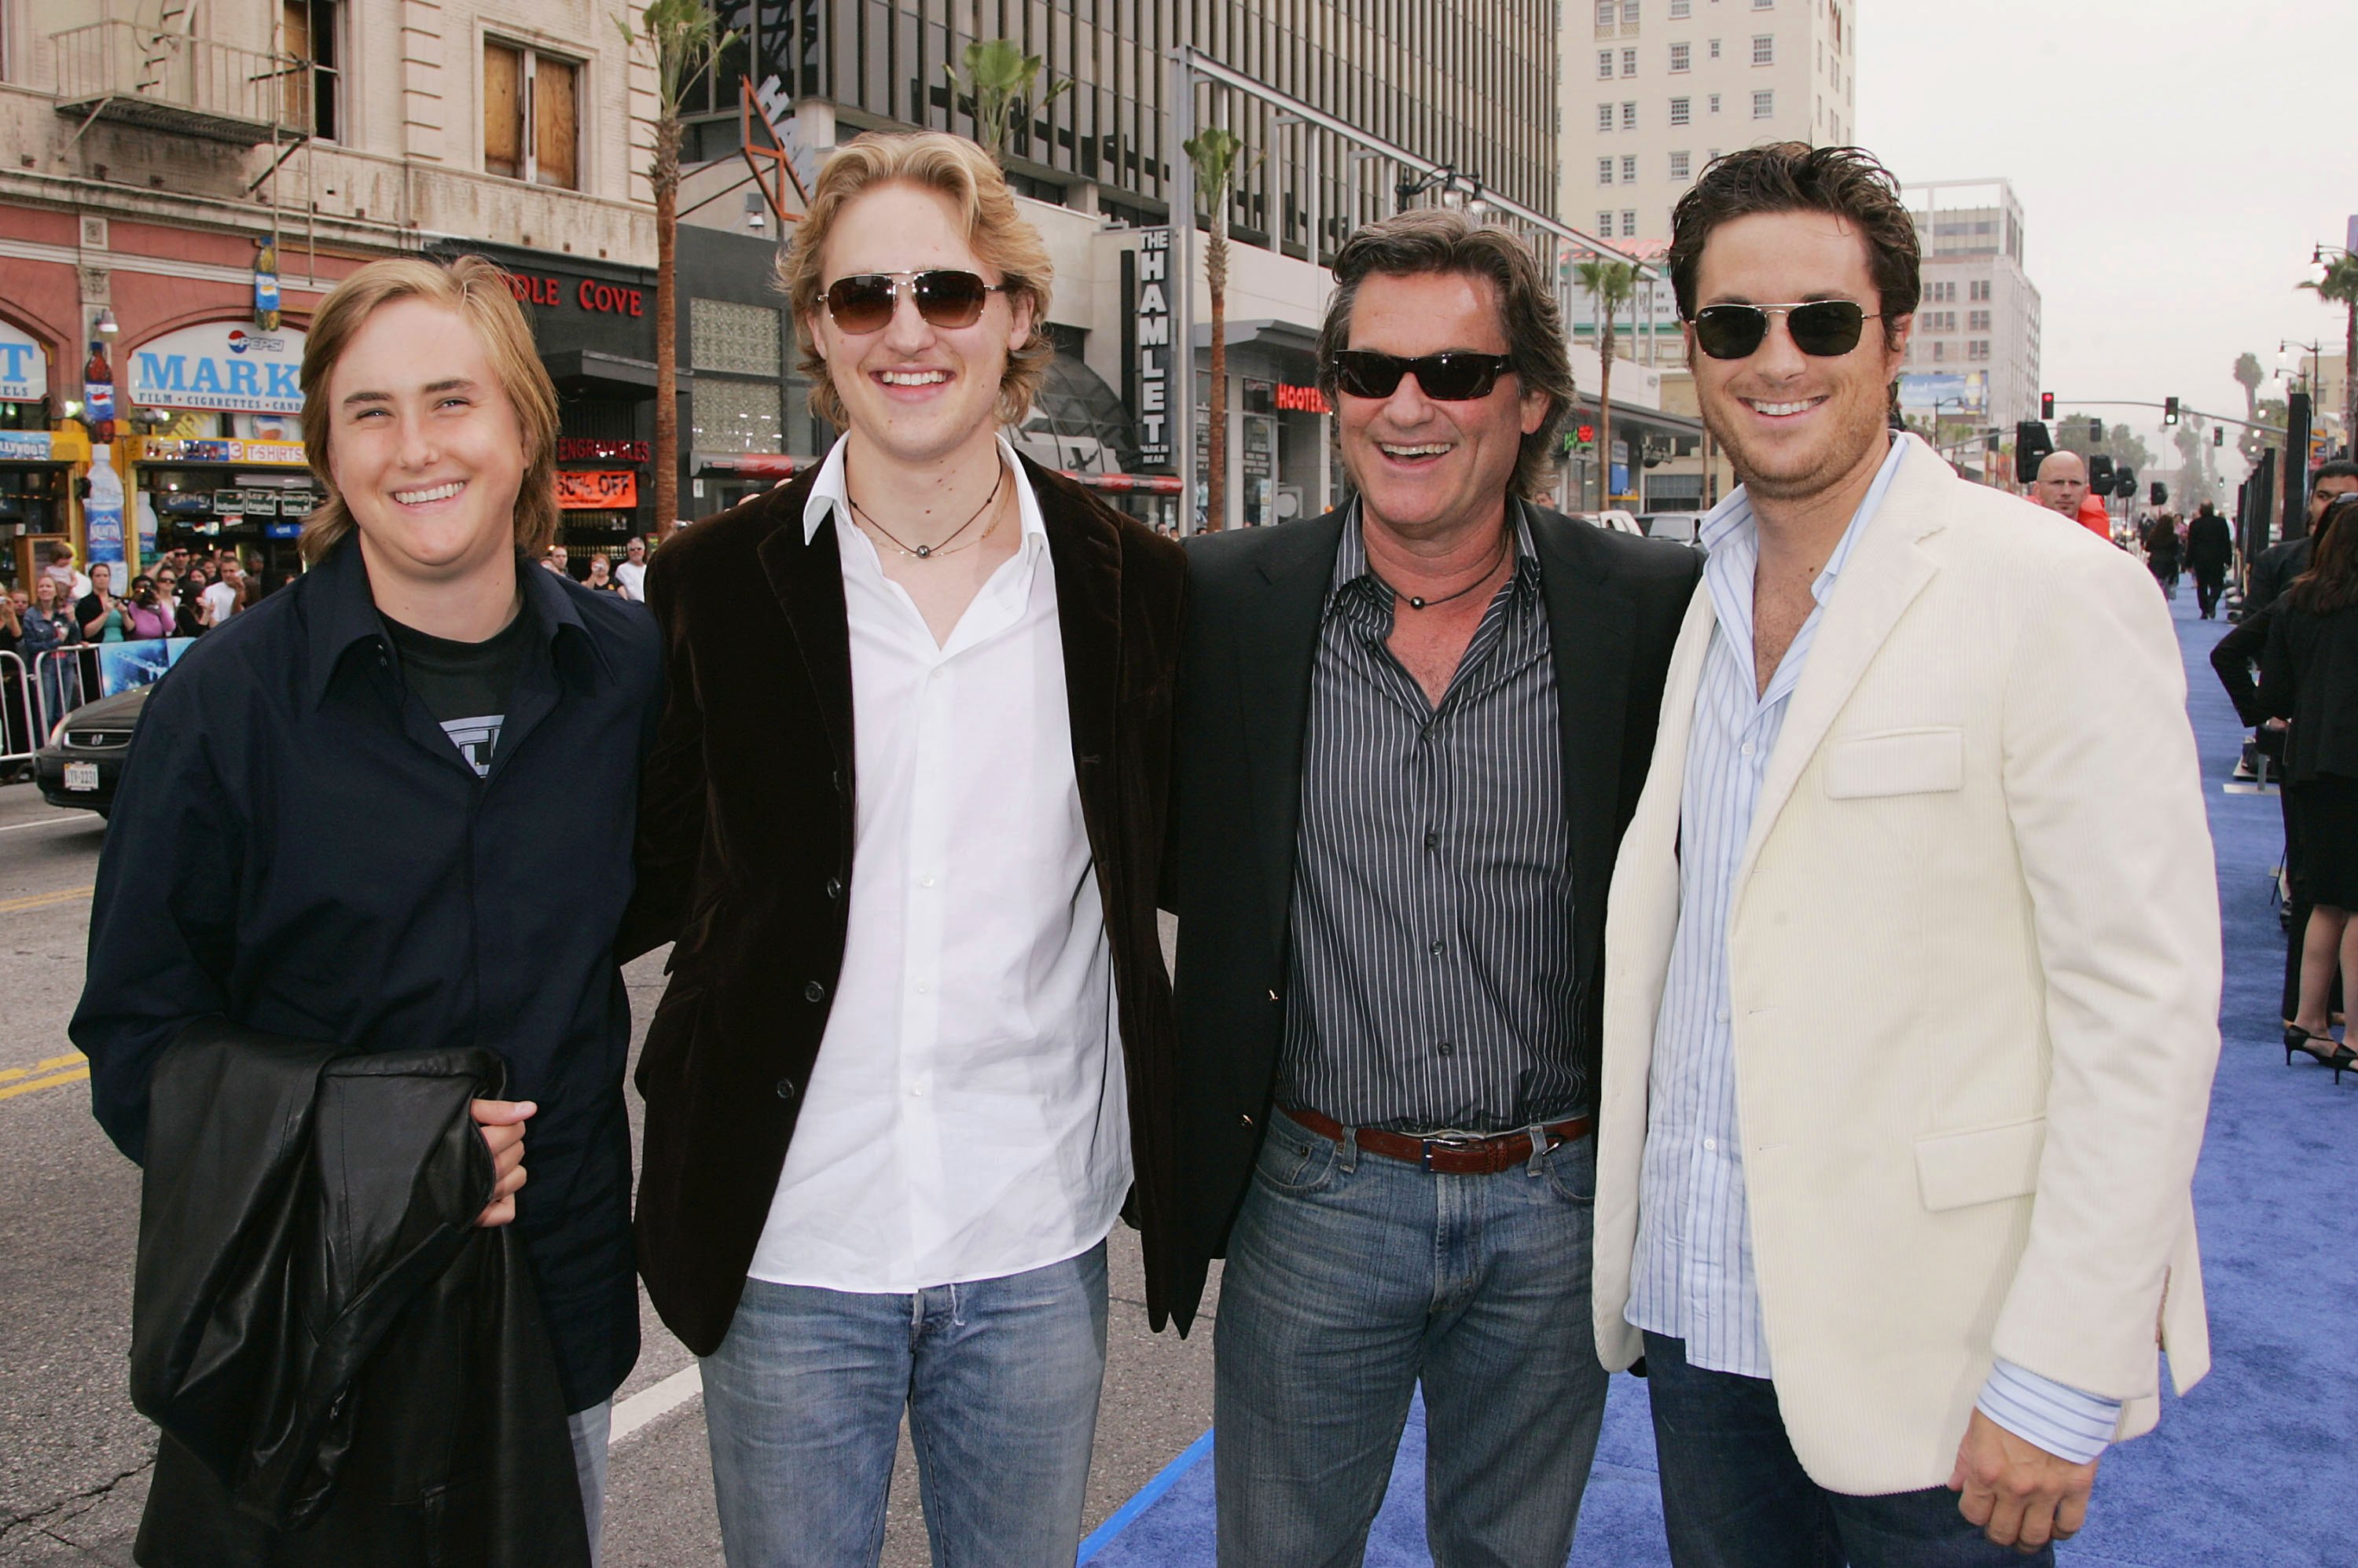 Wyatt Russell, Boston Russell, Kurt Russell and Oliver Hudson at the premiere of "Poseidon" on May 10, 2006 in Los Angeles, California. | Source: Getty Images